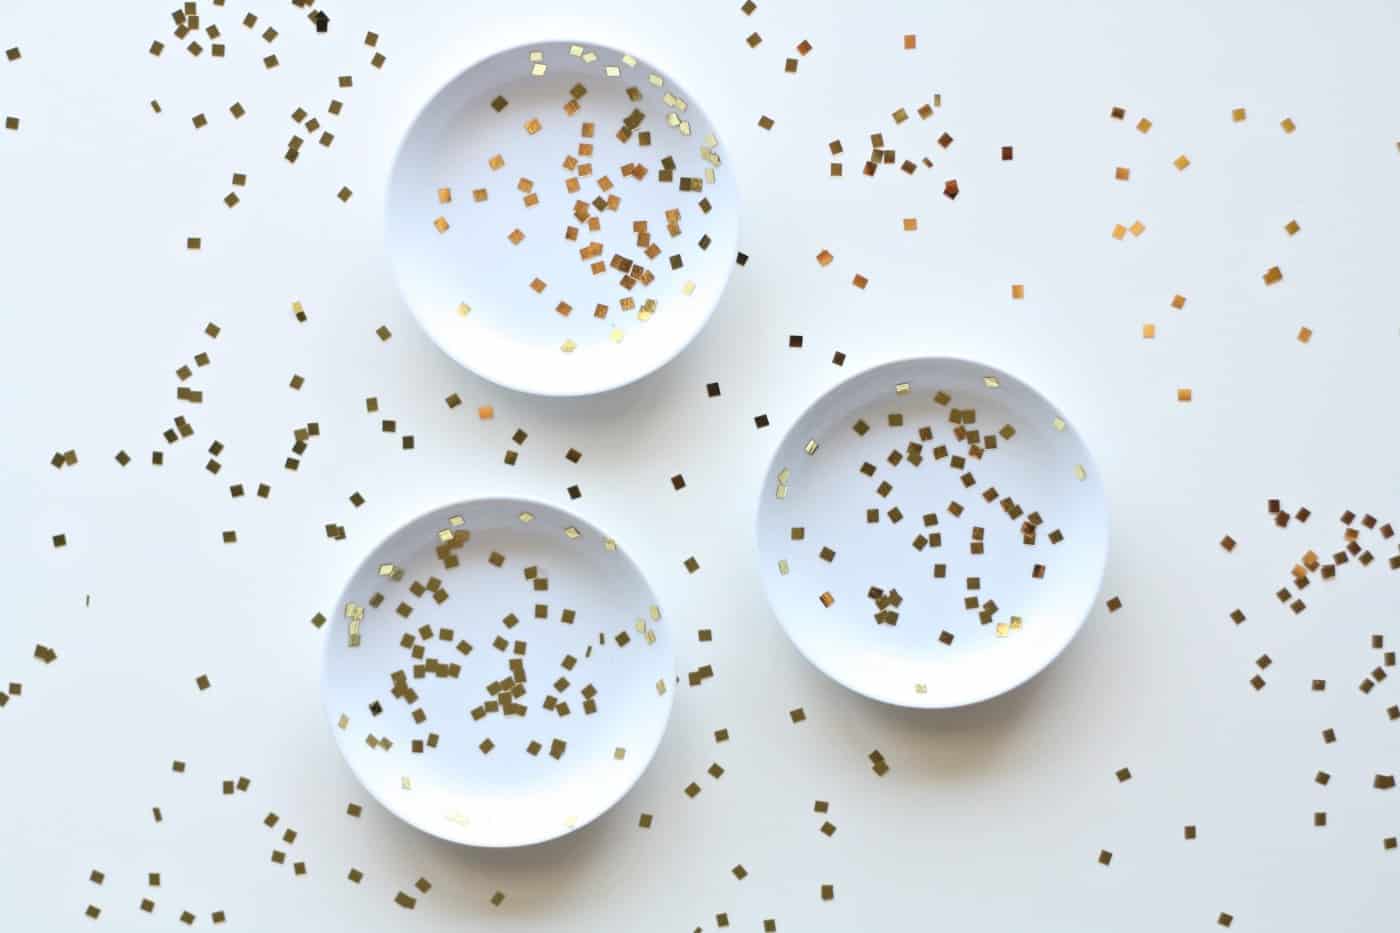 Learn how to decorate ceramic dishes with glitter and turn them into jewelry holders